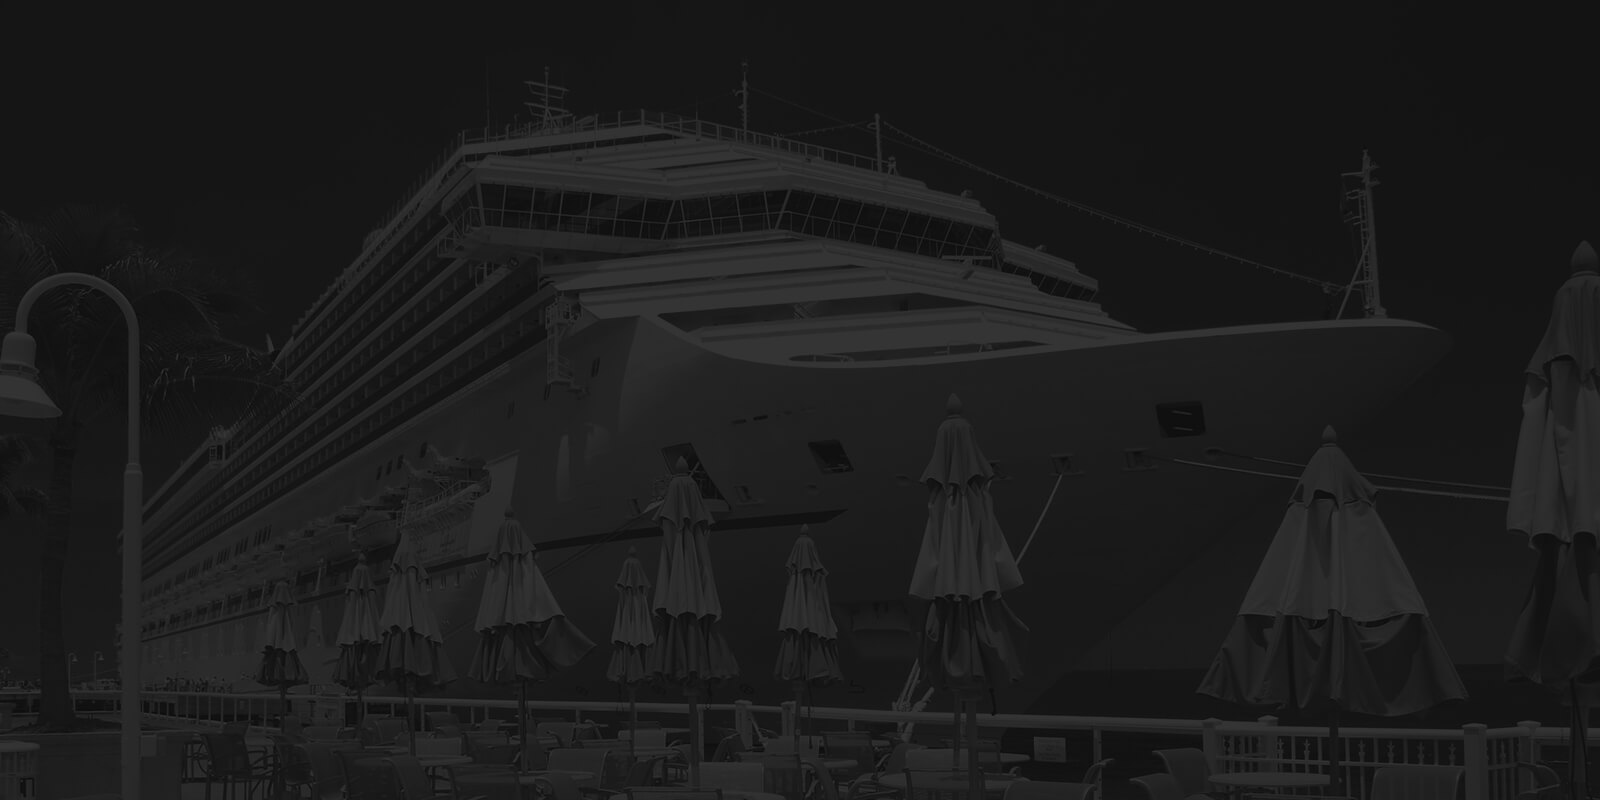 Cruise ship docked at a port